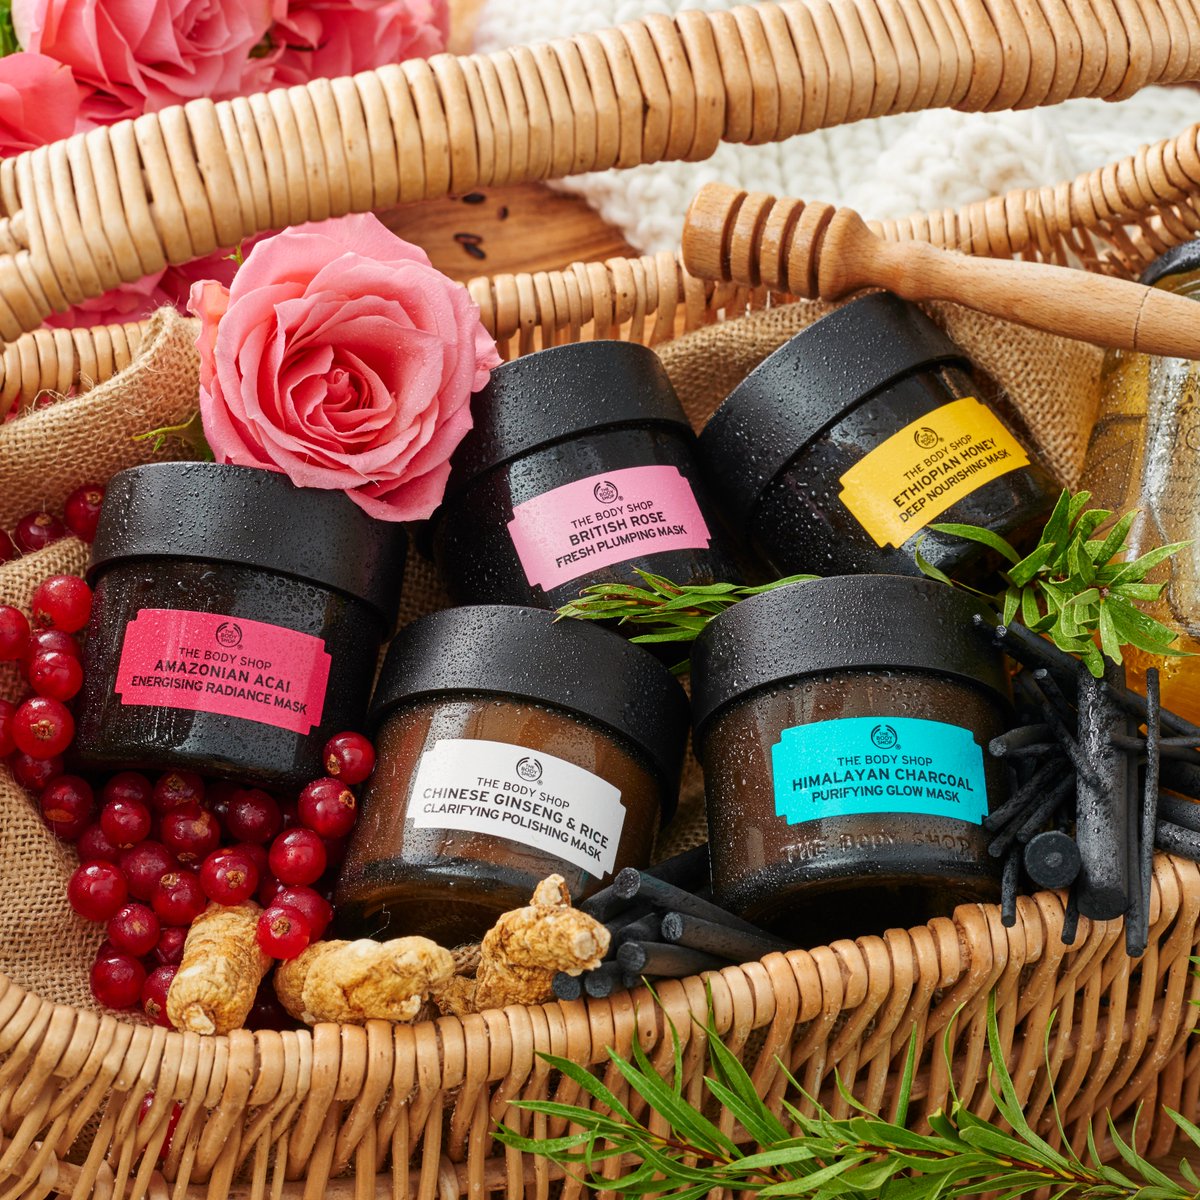 The Body Shop BD on Twitter: "We have a mask for every complexion and skin type!. Which one of our Expert Face Masks is your Let us know below. #ExpertFaceMask #DareToMask #